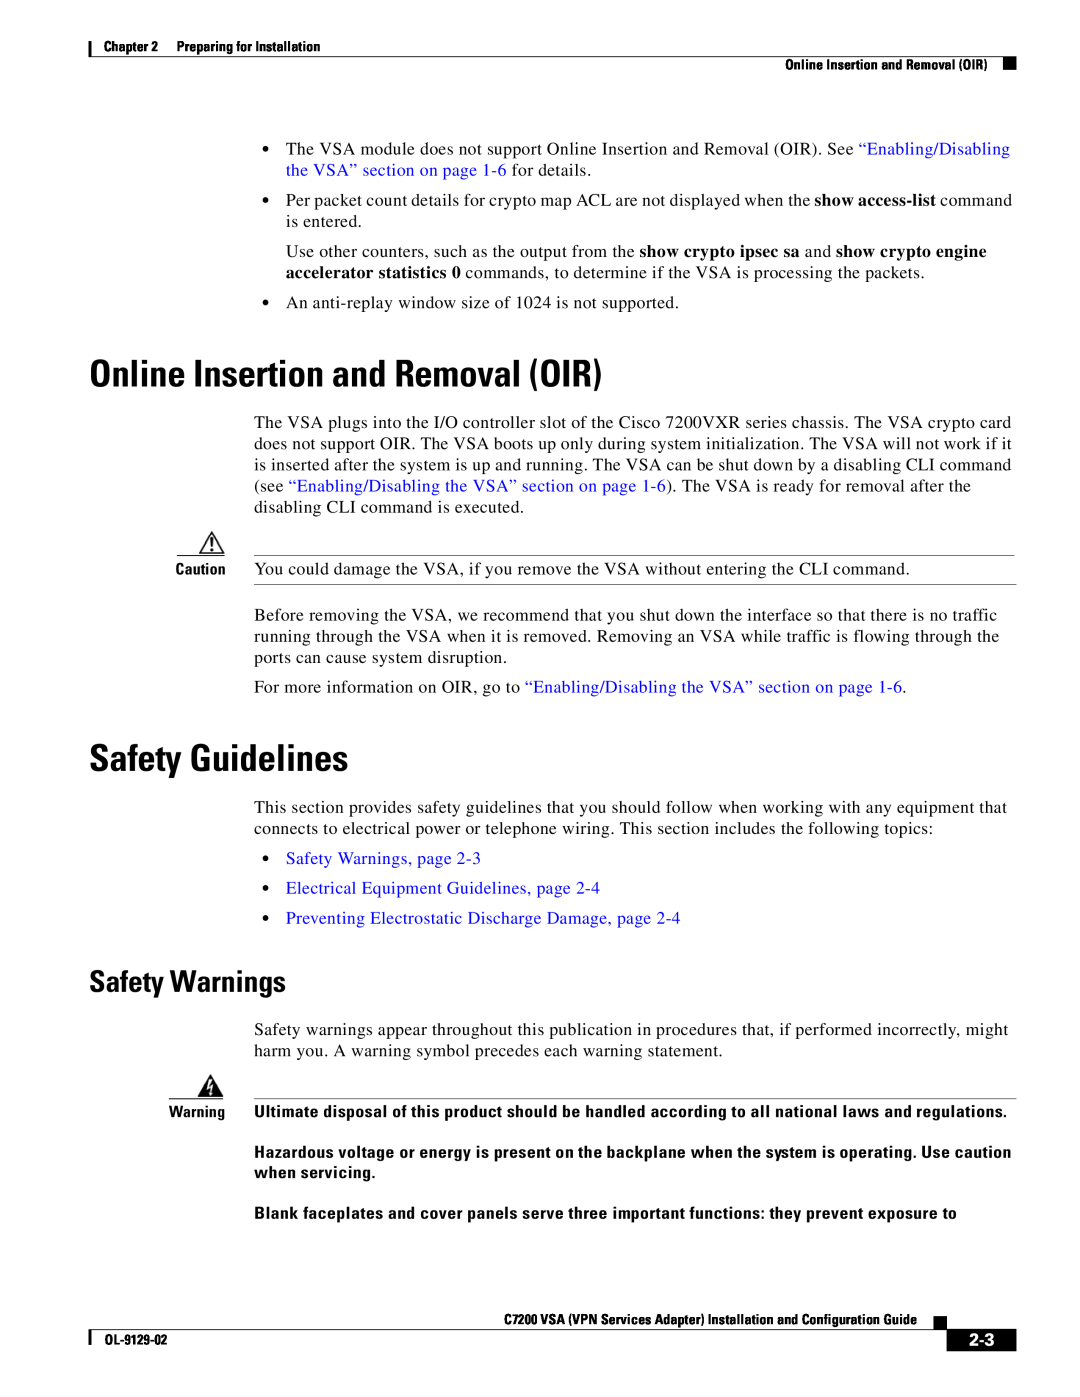 Cisco Systems C7200 manual Online Insertion and Removal OIR, Safety Guidelines, Safety Warnings 